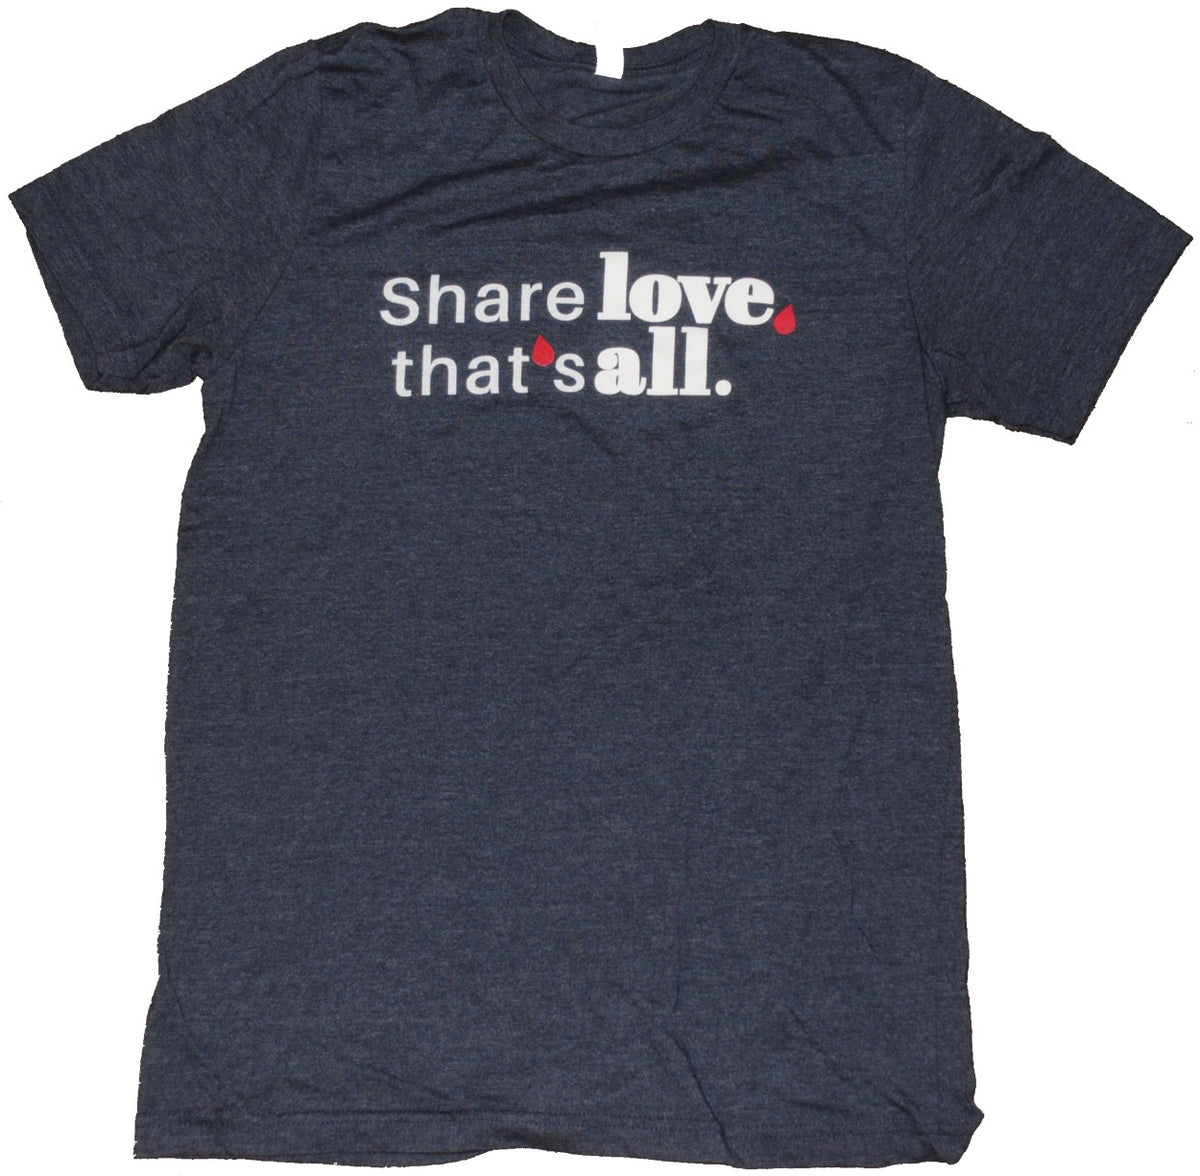 Share Love T-Shirt in Navy Blue